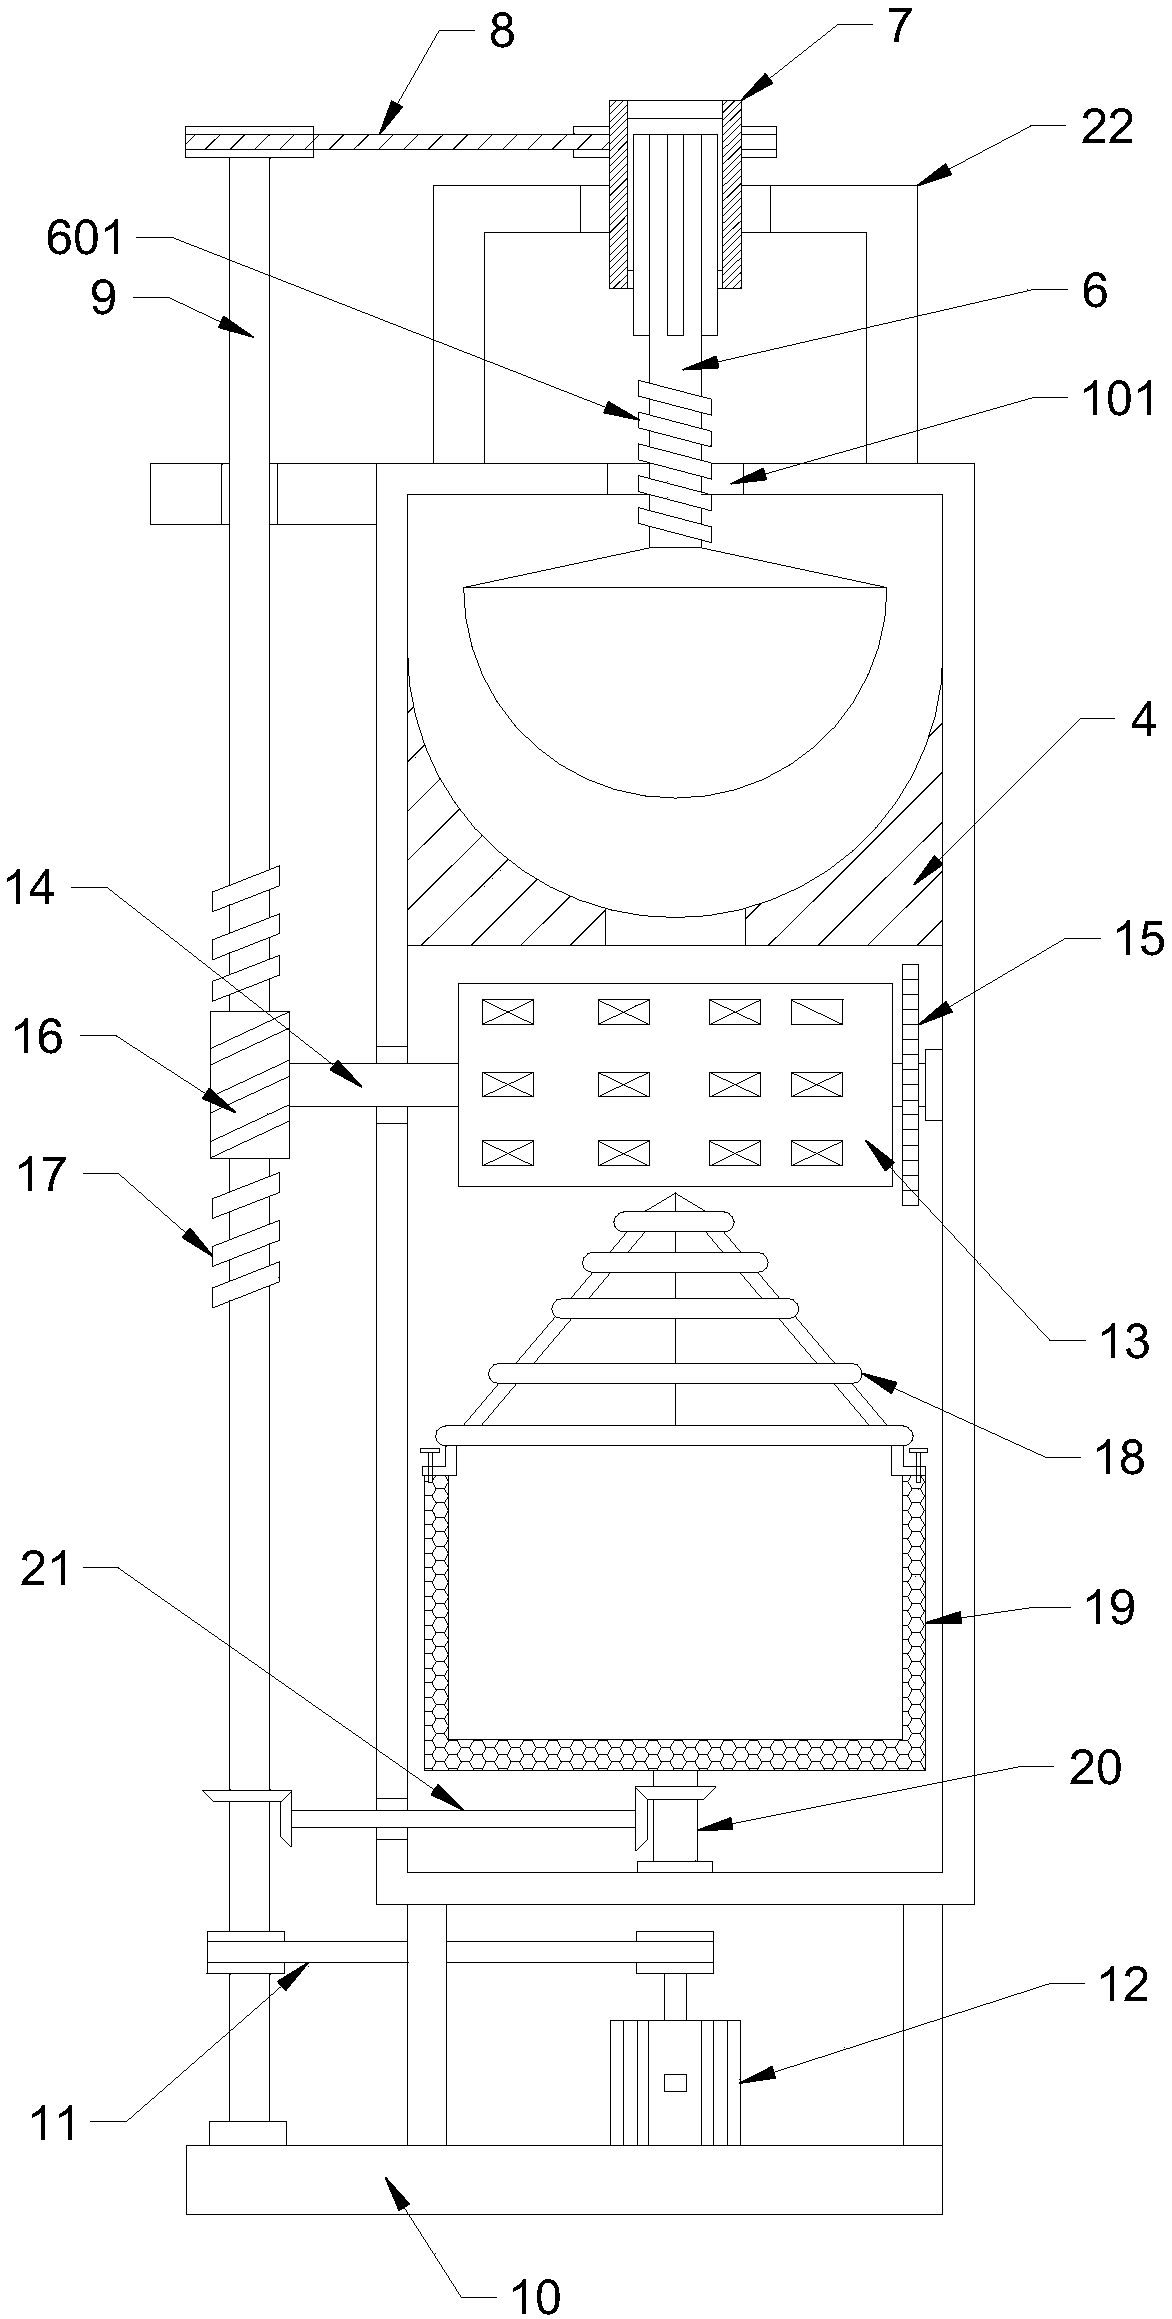 Press waste disposal device with metal recovery function